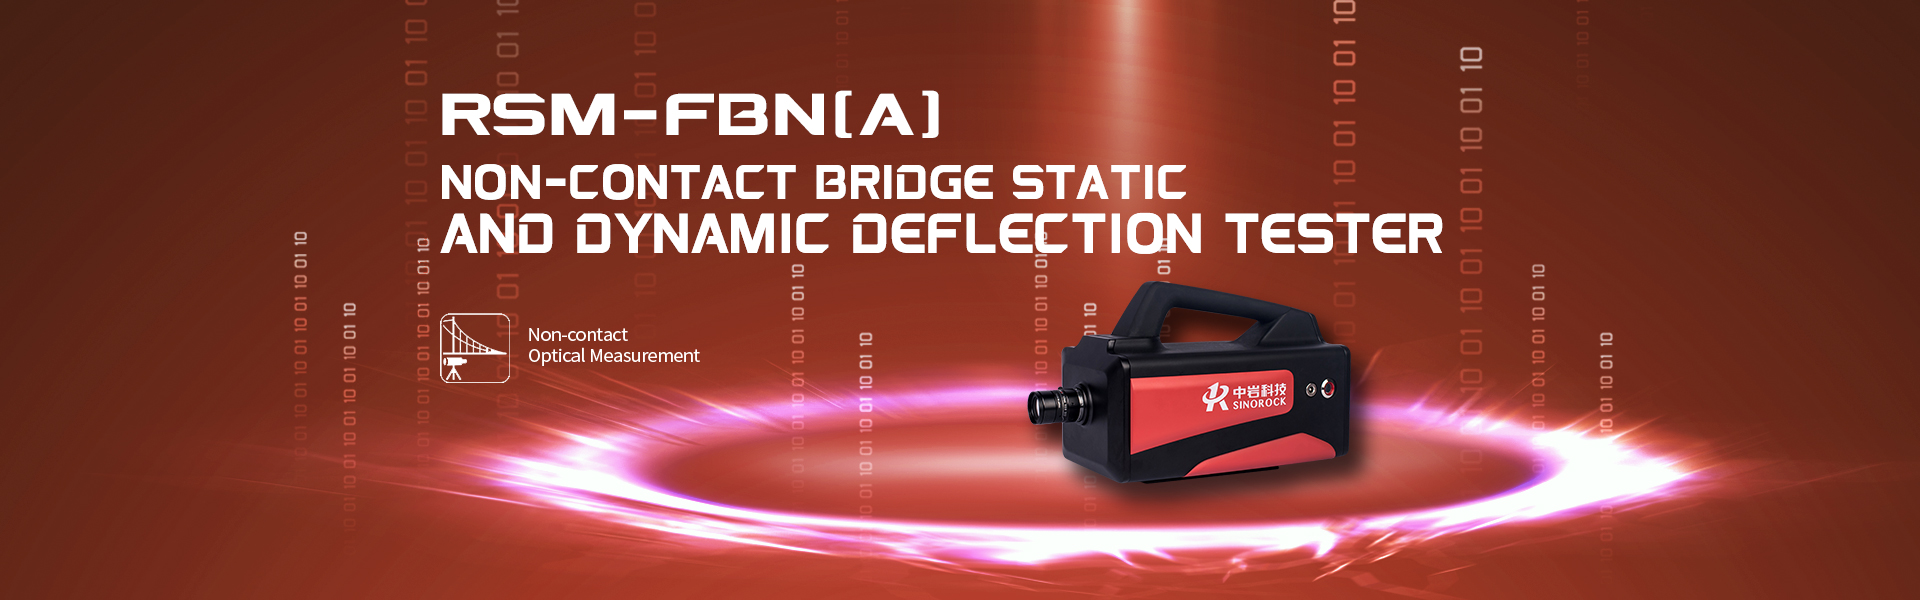 RSM-FBN(A) Non-contact Bridge Static and Dynamic Deflection Tester